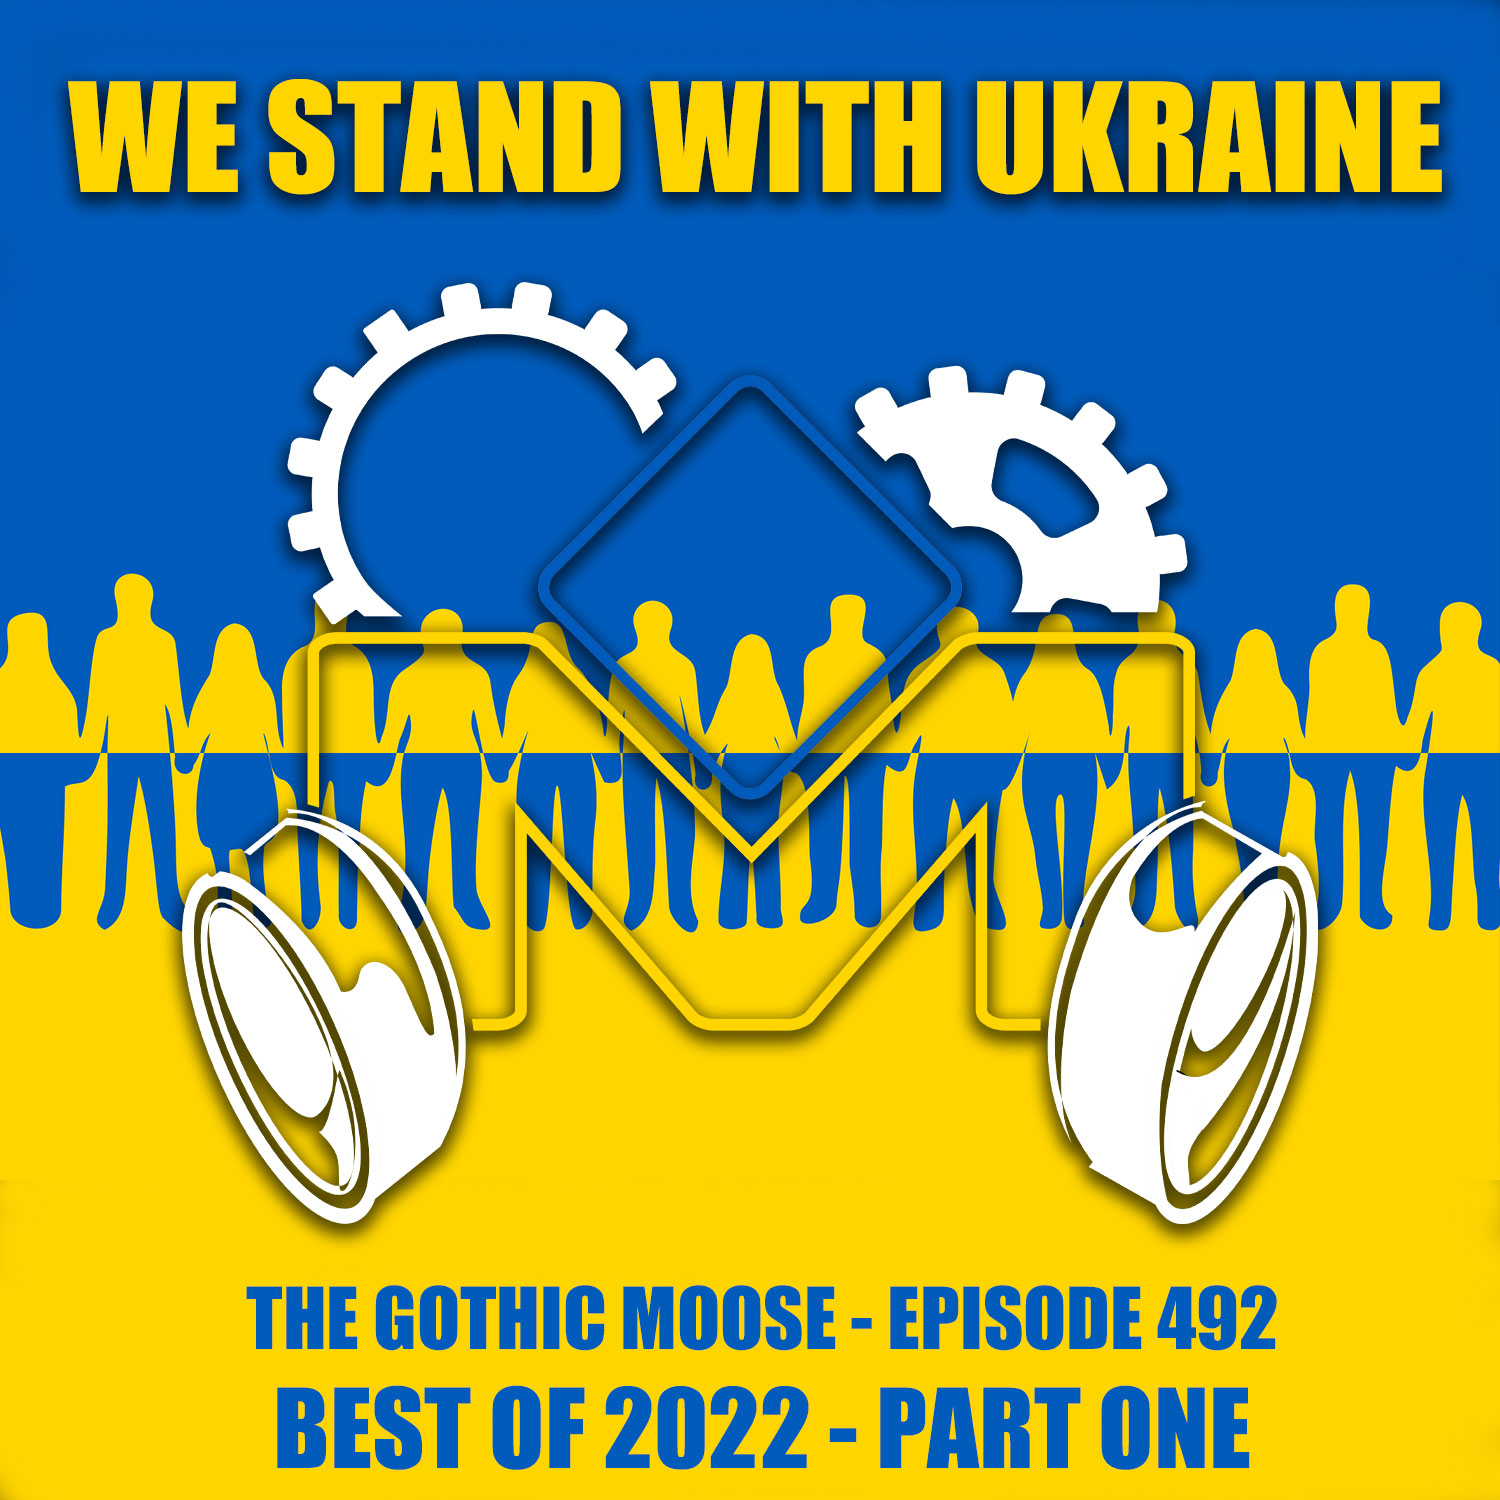 The Gothic Moose – Episode 493 – Best of 2022 – Part 2 – Bands that are Ukrainian